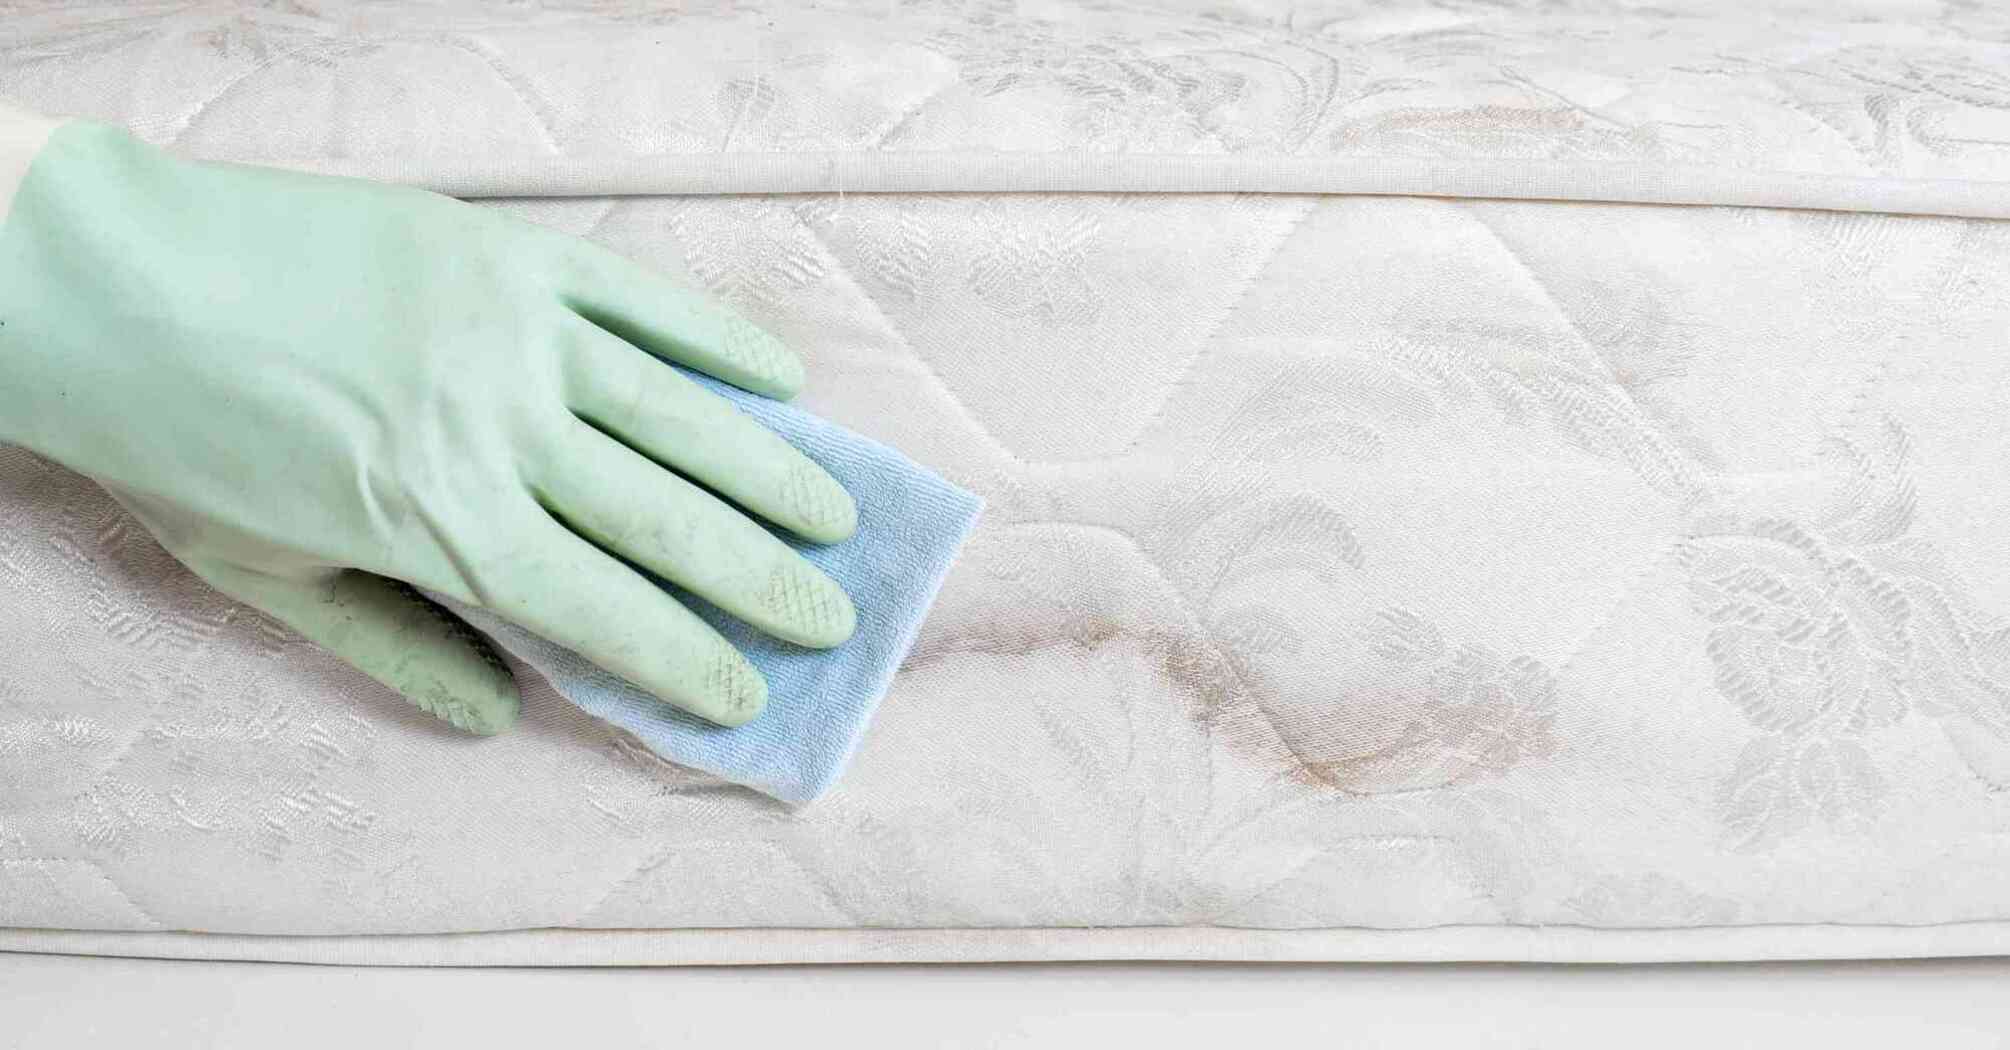 How to quickly remove mold from a mattress